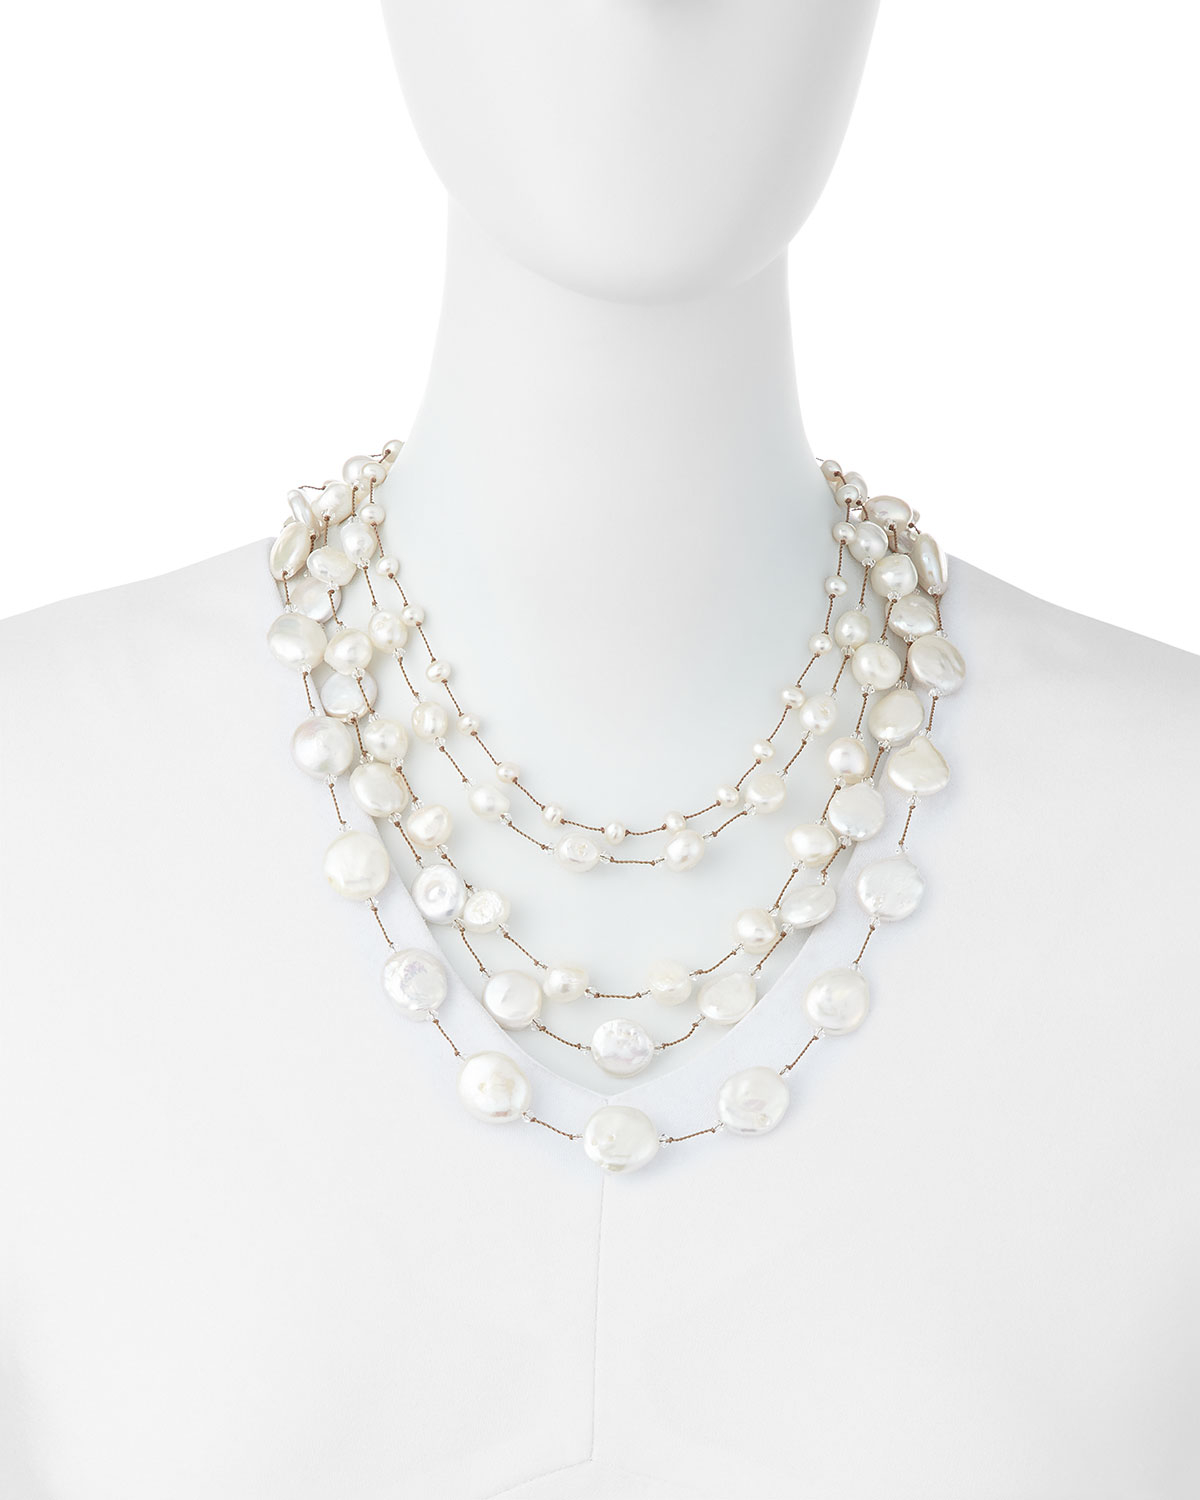 Lyst - Margo Morrison Five-strand Pearl & Crystal Necklace in Metallic